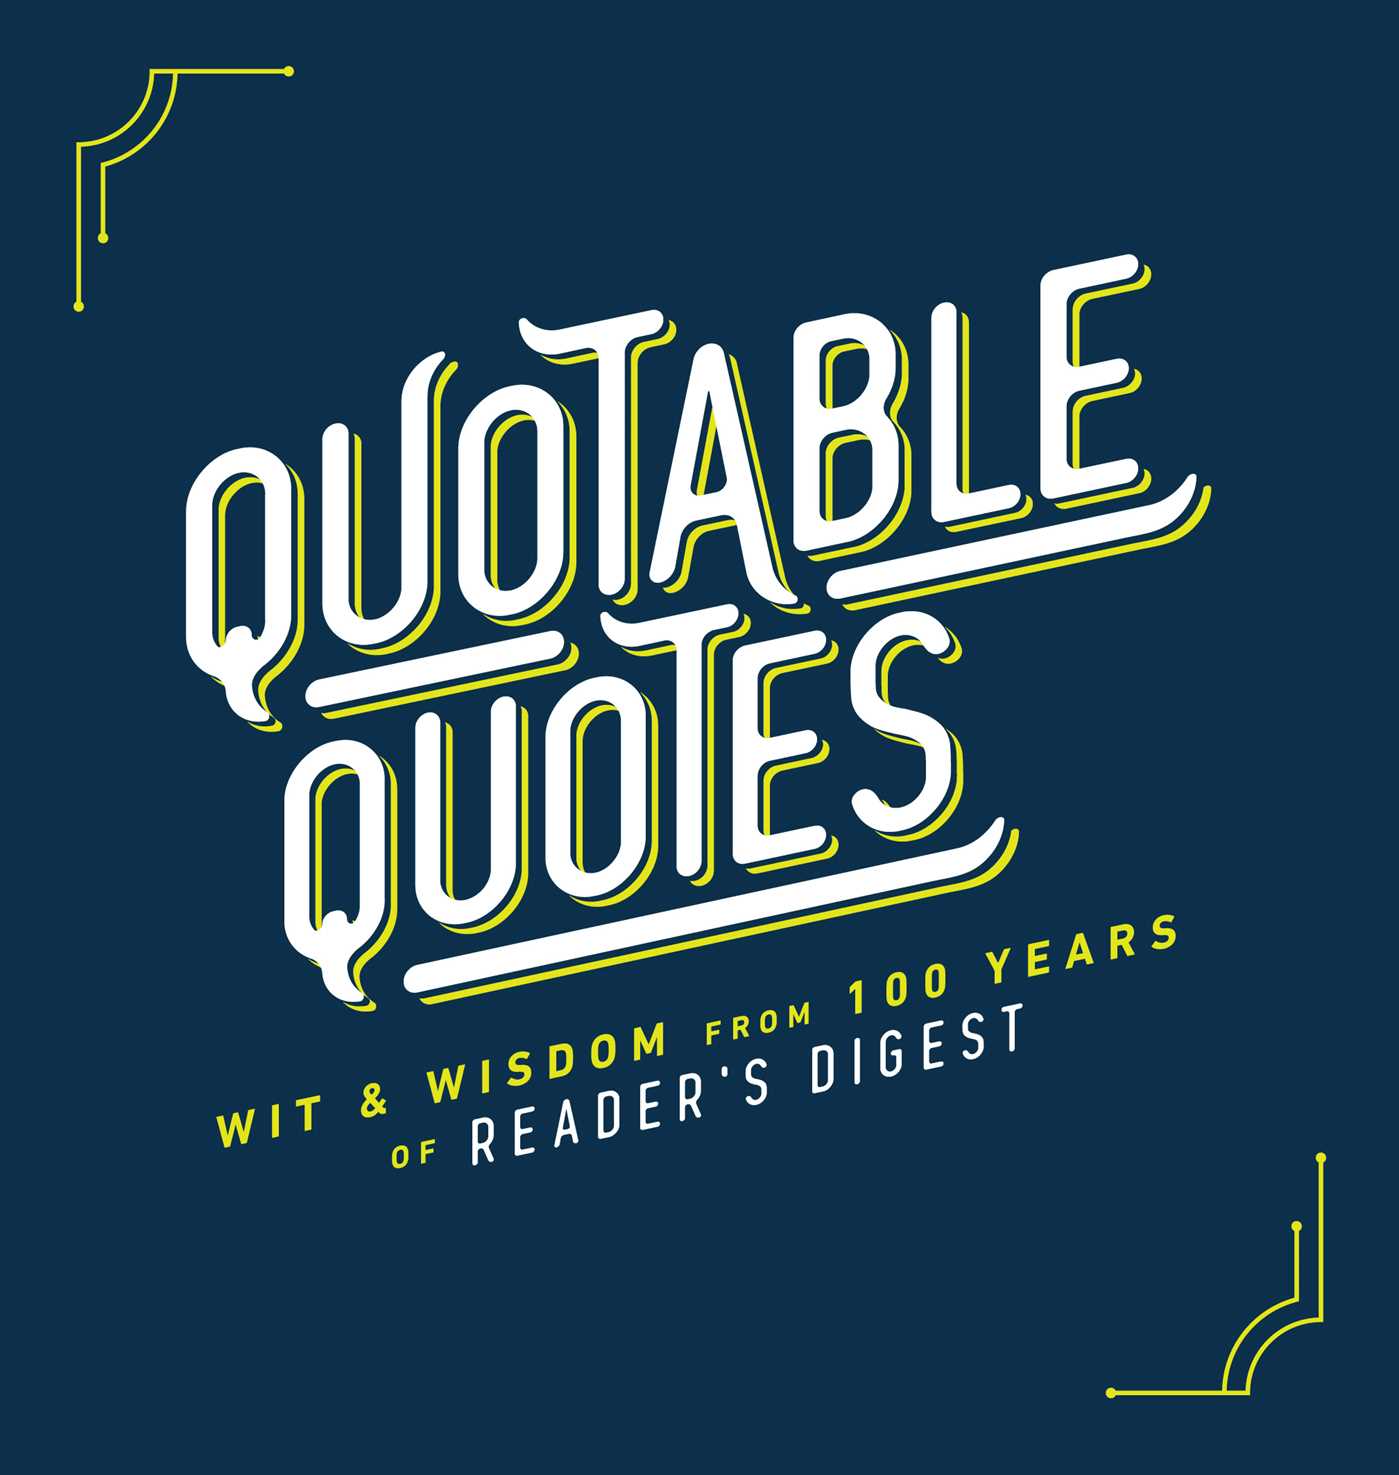 QUOTABLE QUOTES, by READERS DIGEST